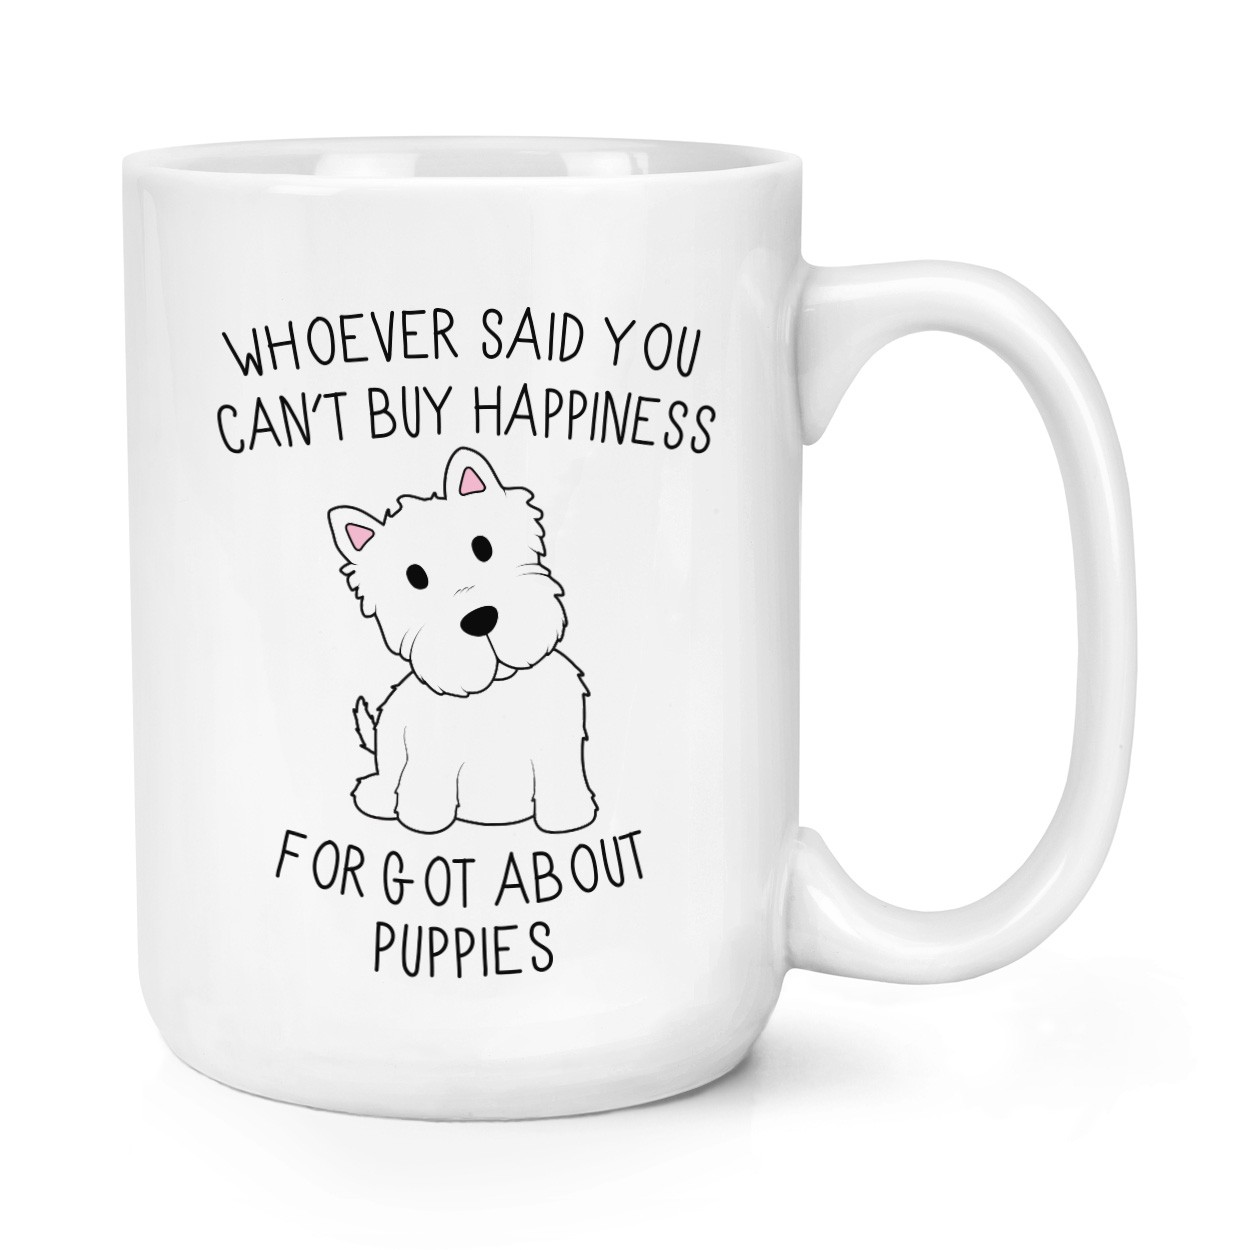 Whoever Said You Can't Buy Happiness Forgot About Puppies 15oz Large Mug Cup